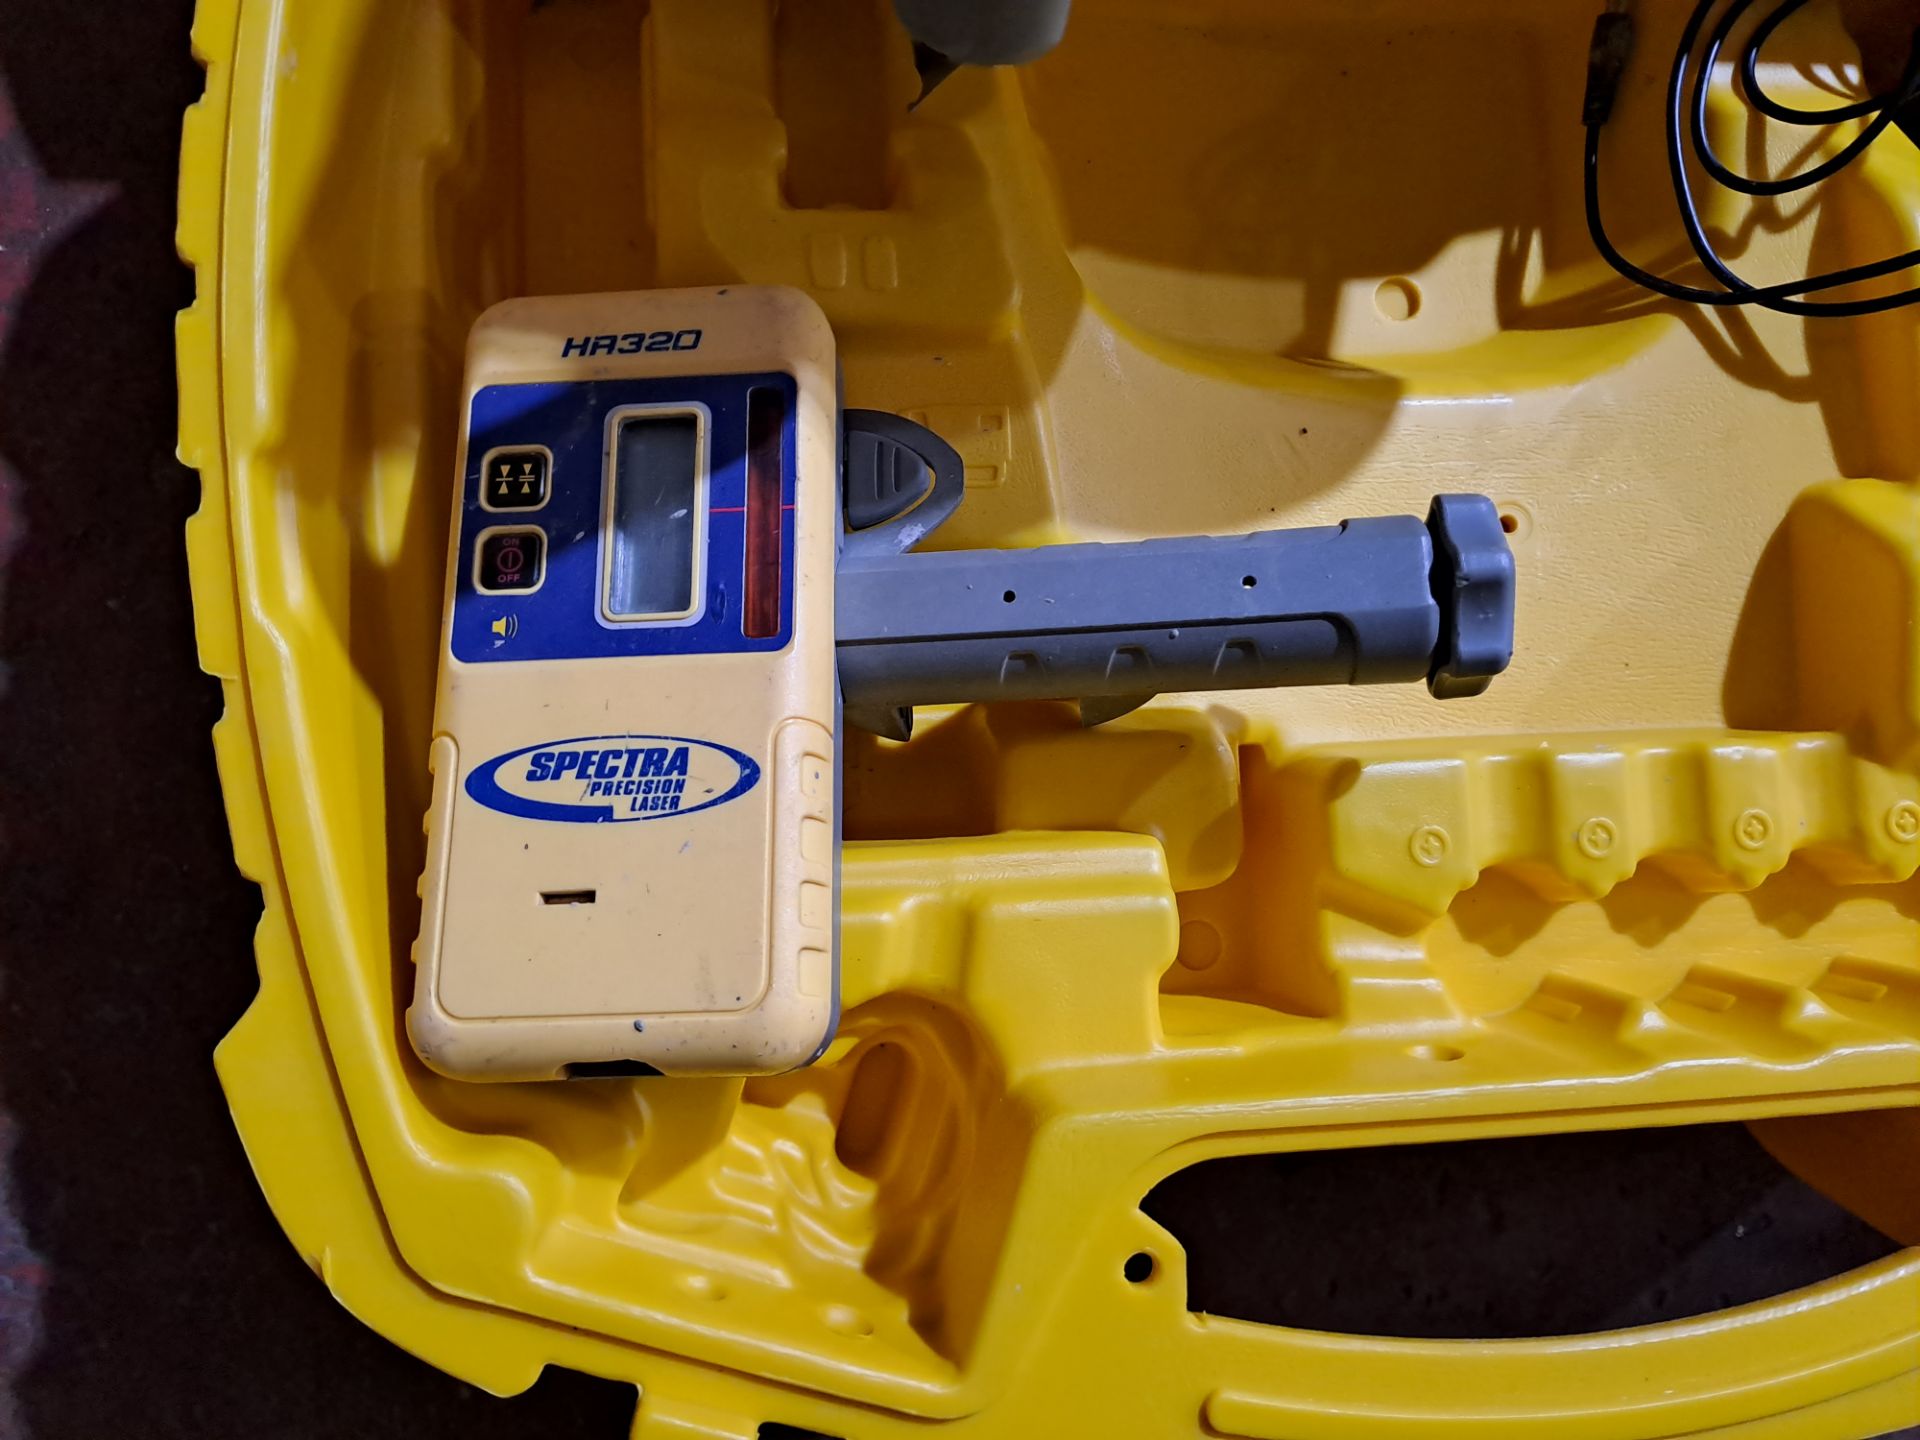 Trimble LL300N Spectra Precision laser level, serial no. 21173427, with Trimble HR320 detector, - Image 3 of 3